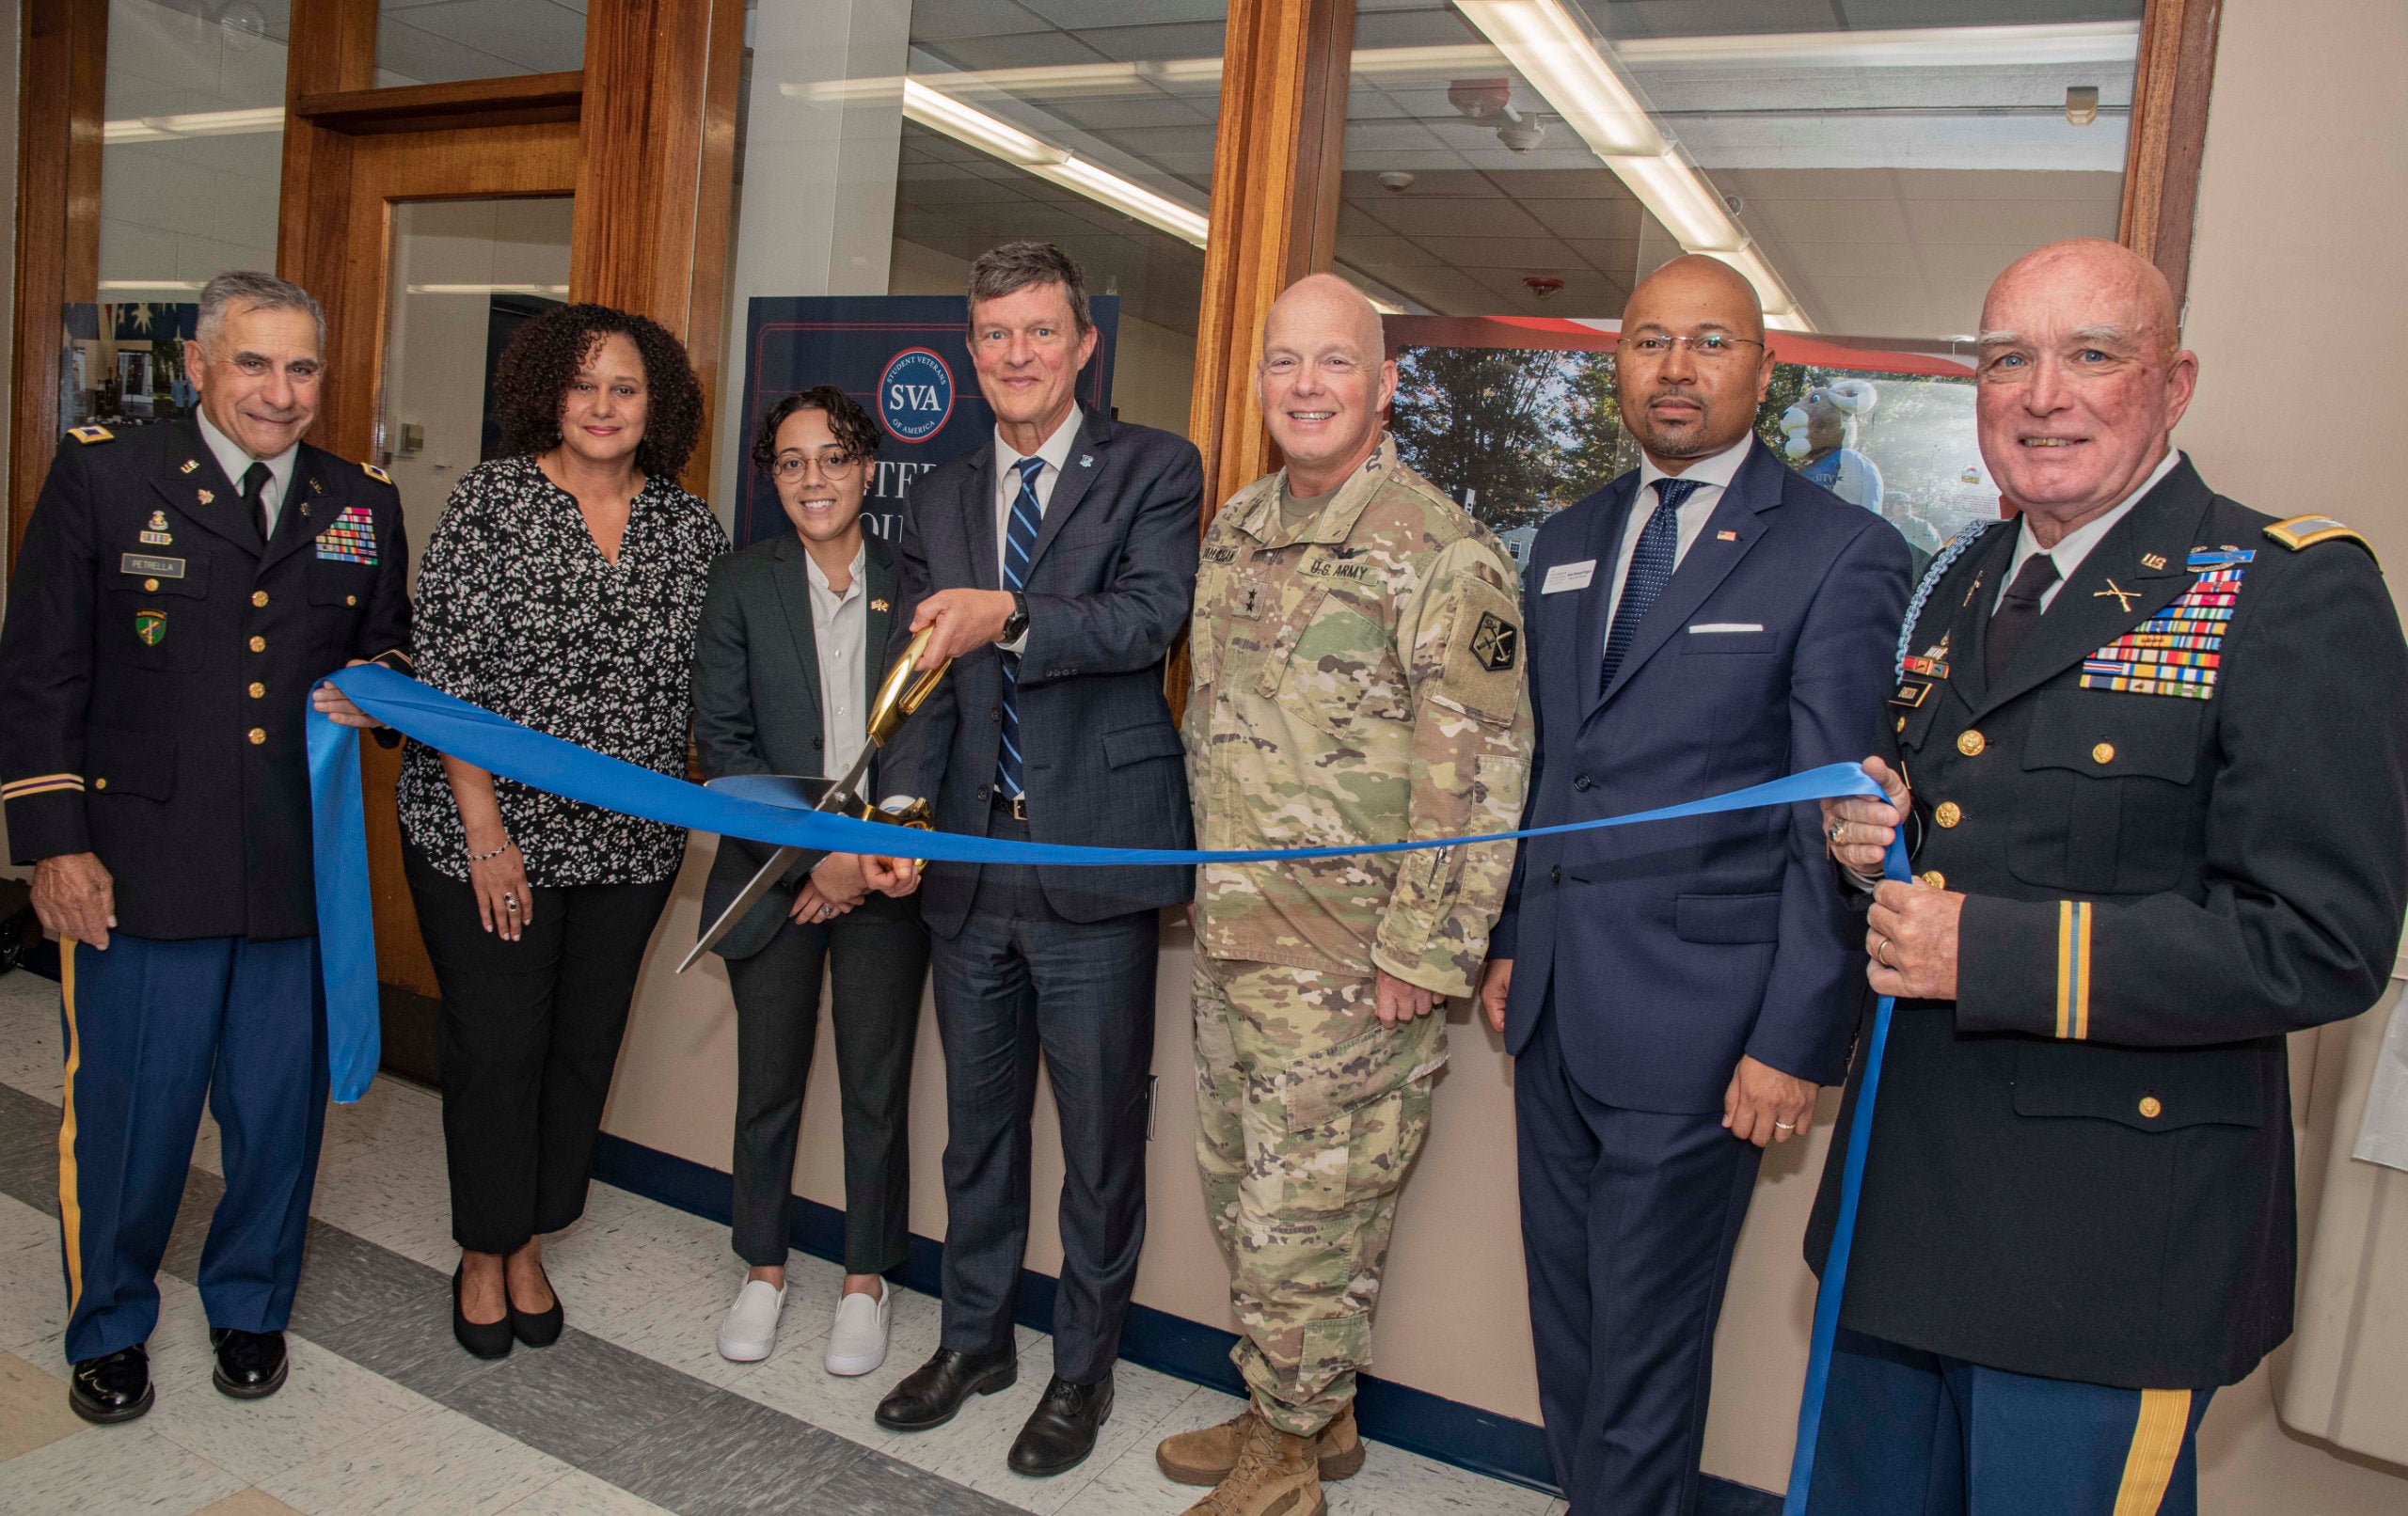 President Parlange at a ribbon cutting ceremony, surrounded by retired members of the U.S. military and URI leadership